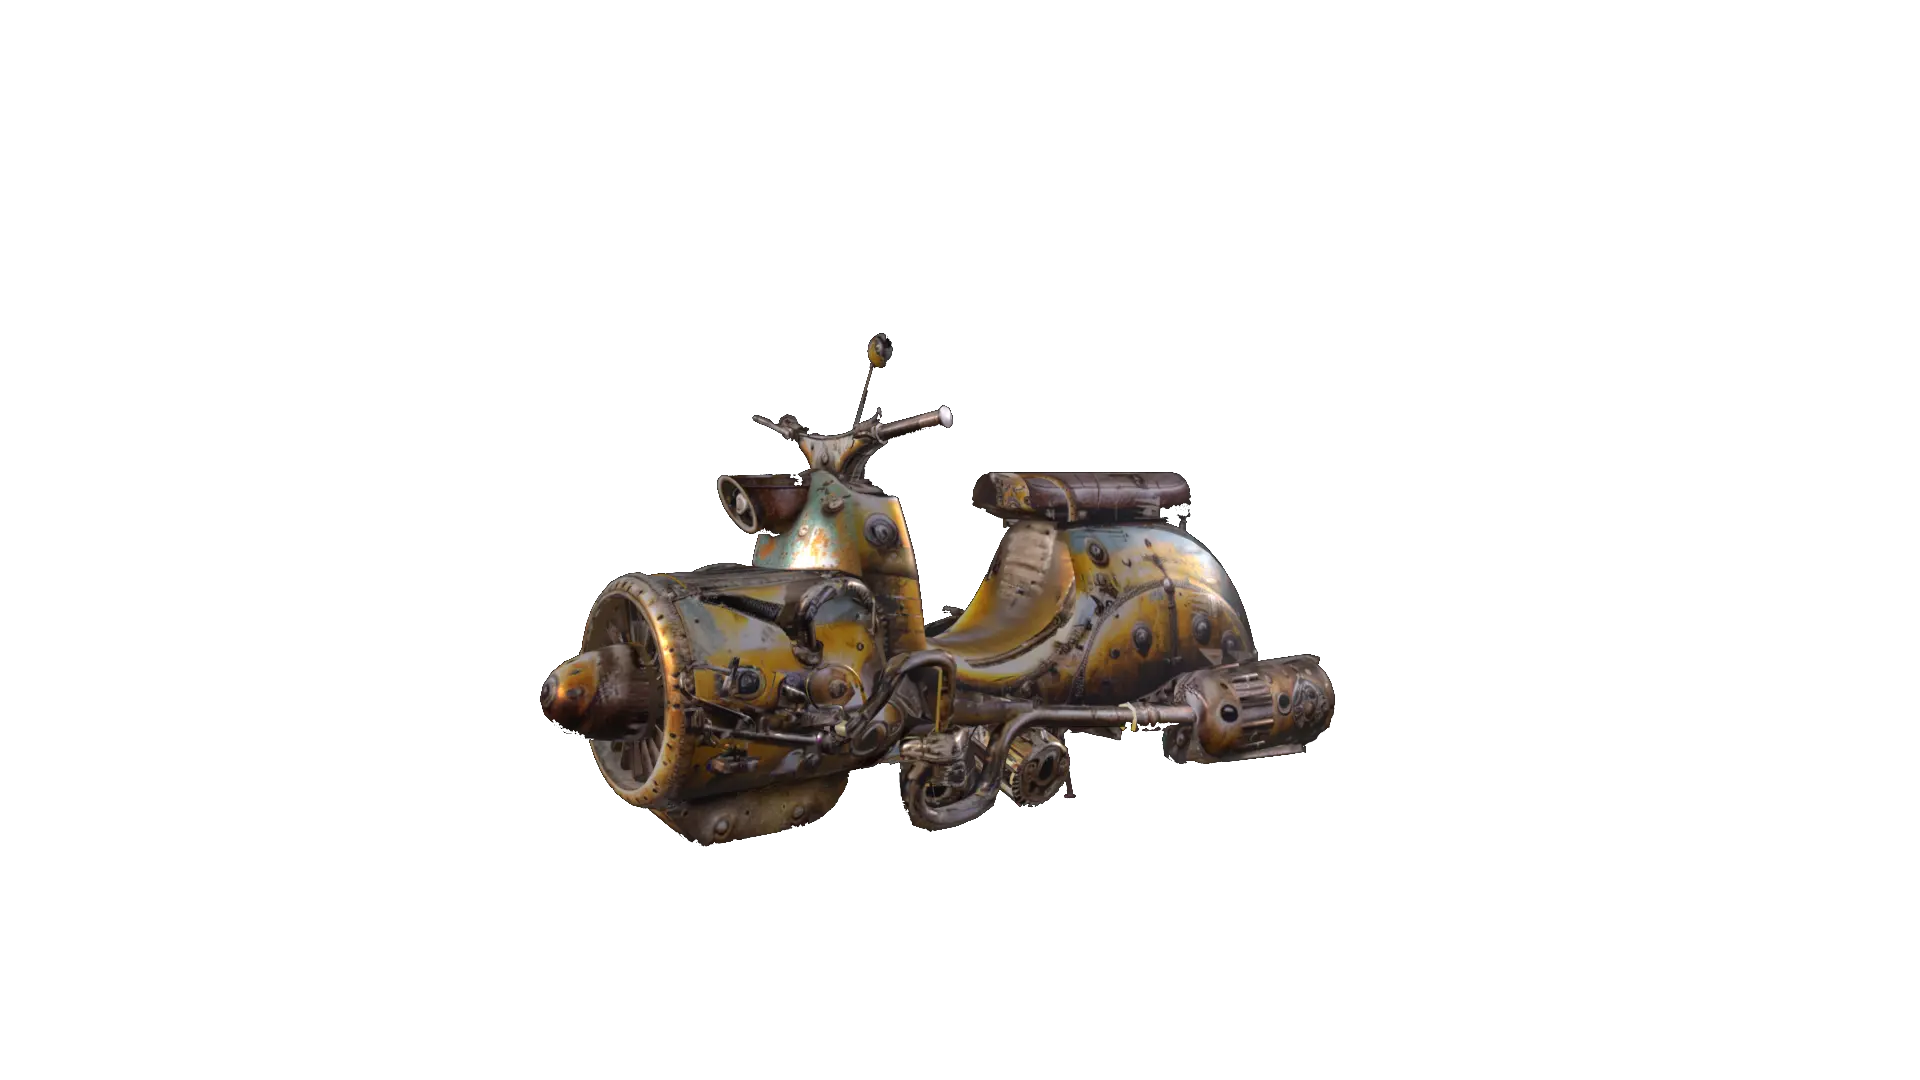 A motorcycle from the era of steam engines in the 20th century, steampunk, 4k, hdr